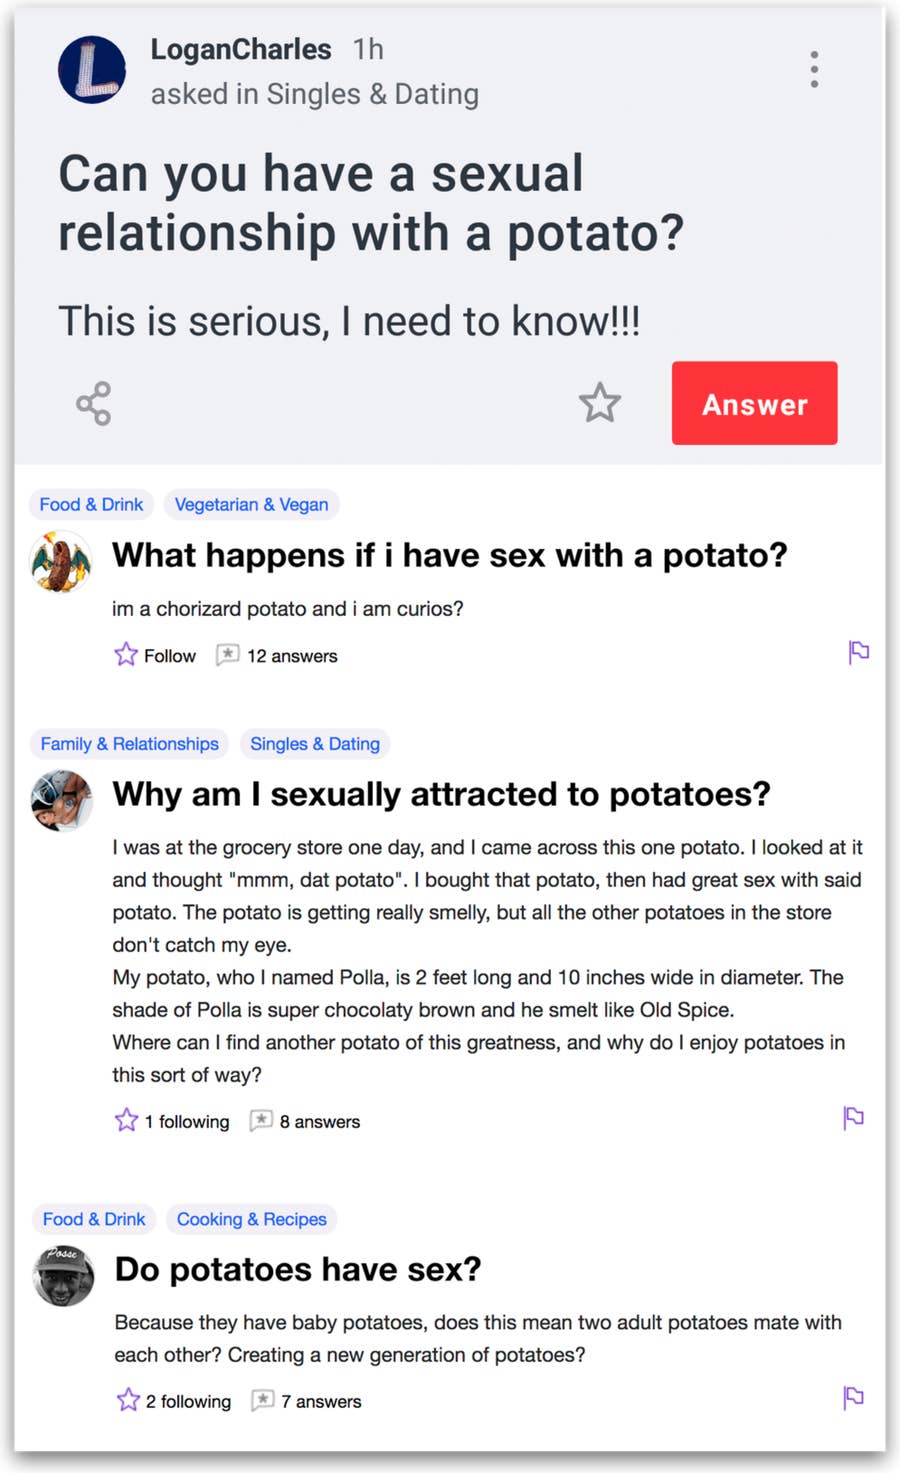 24 Yahoo Answers That Answered Nothing